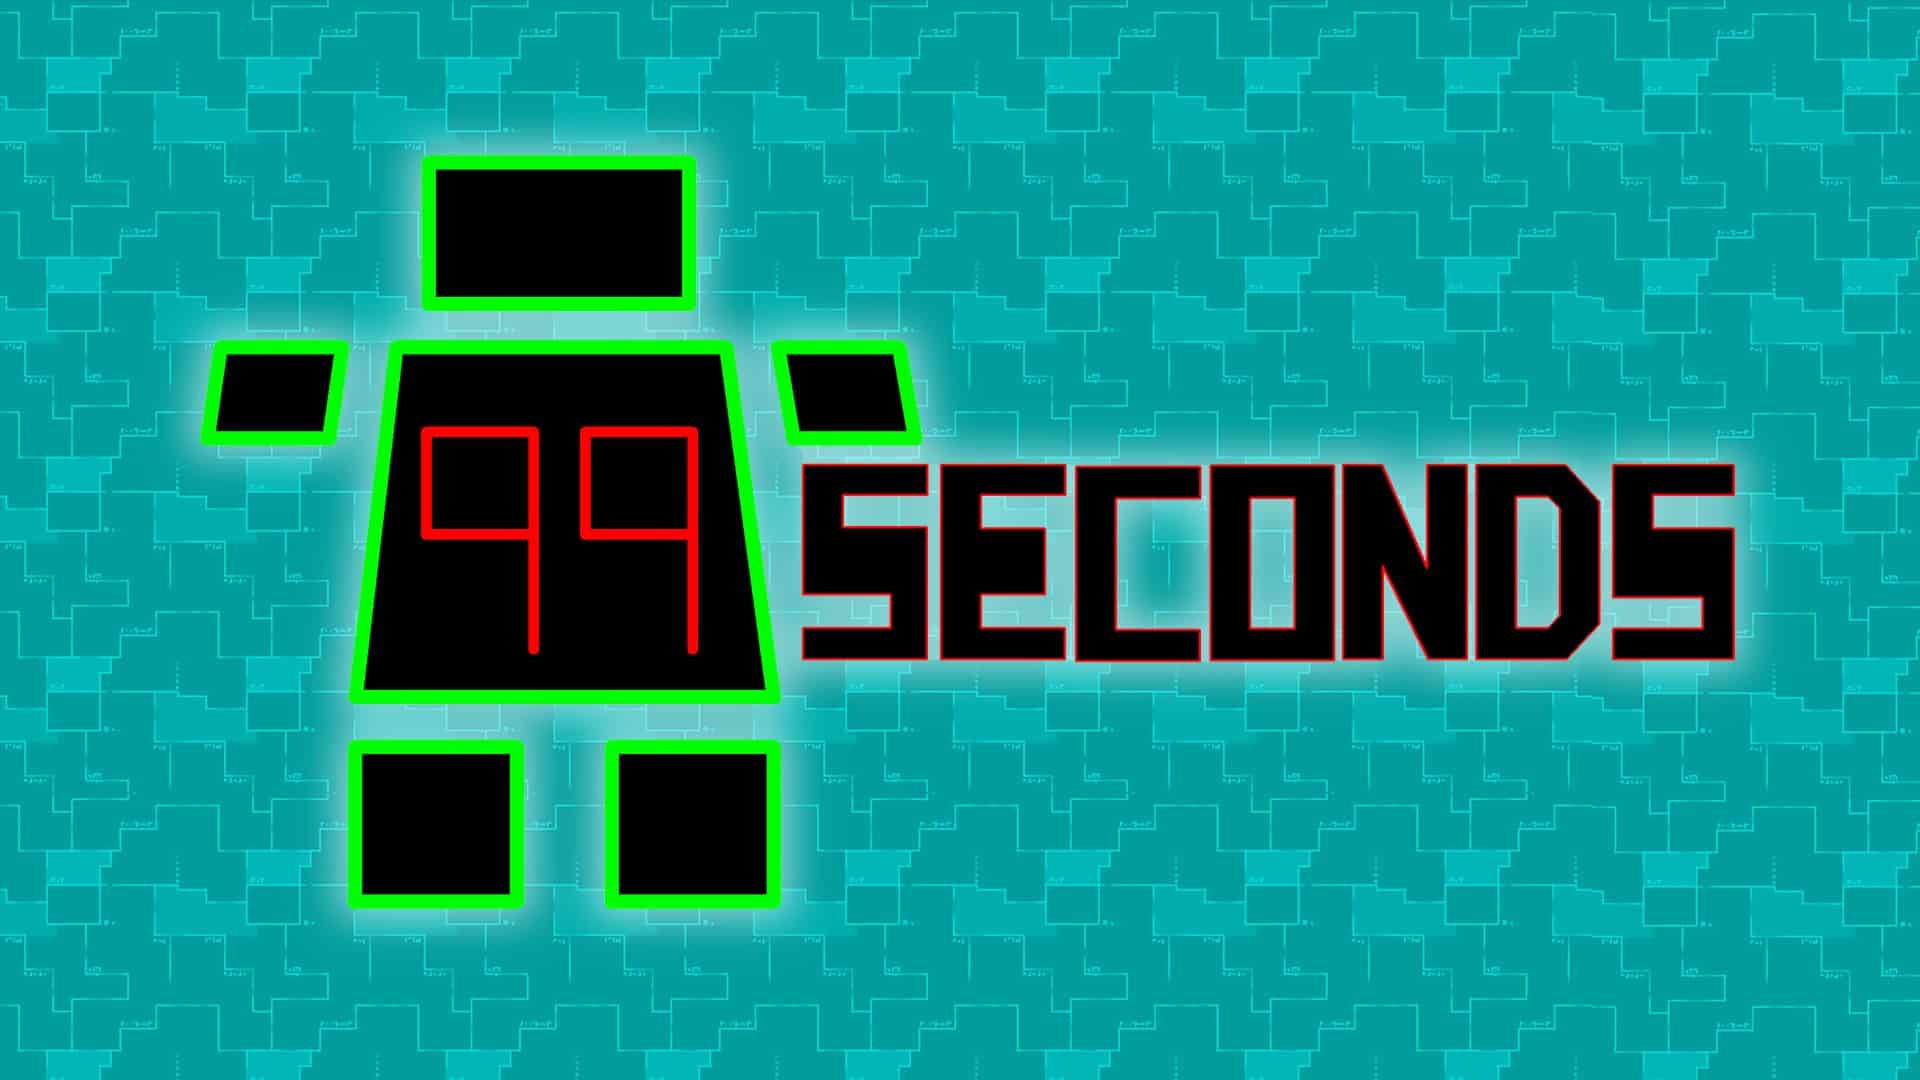 99Seconds stats facts